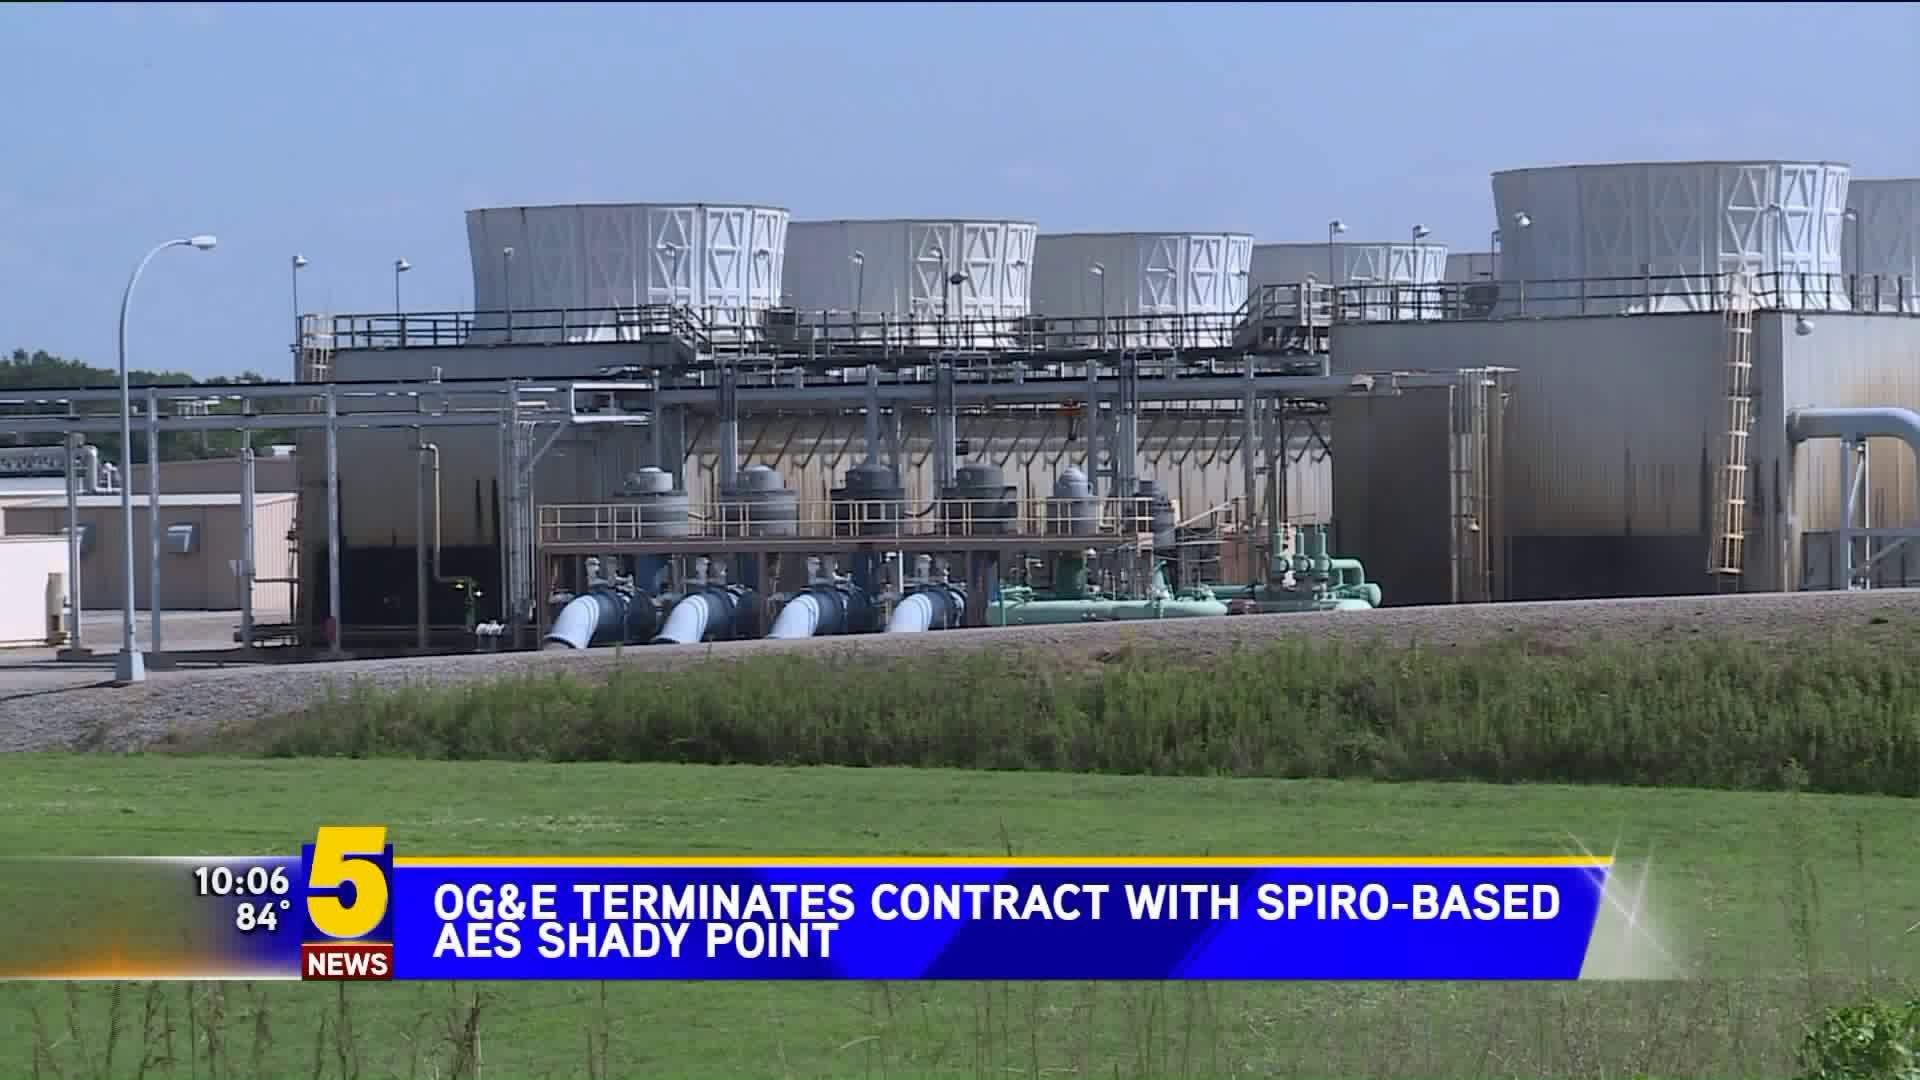 OG&E Terminates Contract With Spiro Based AES Shady Point